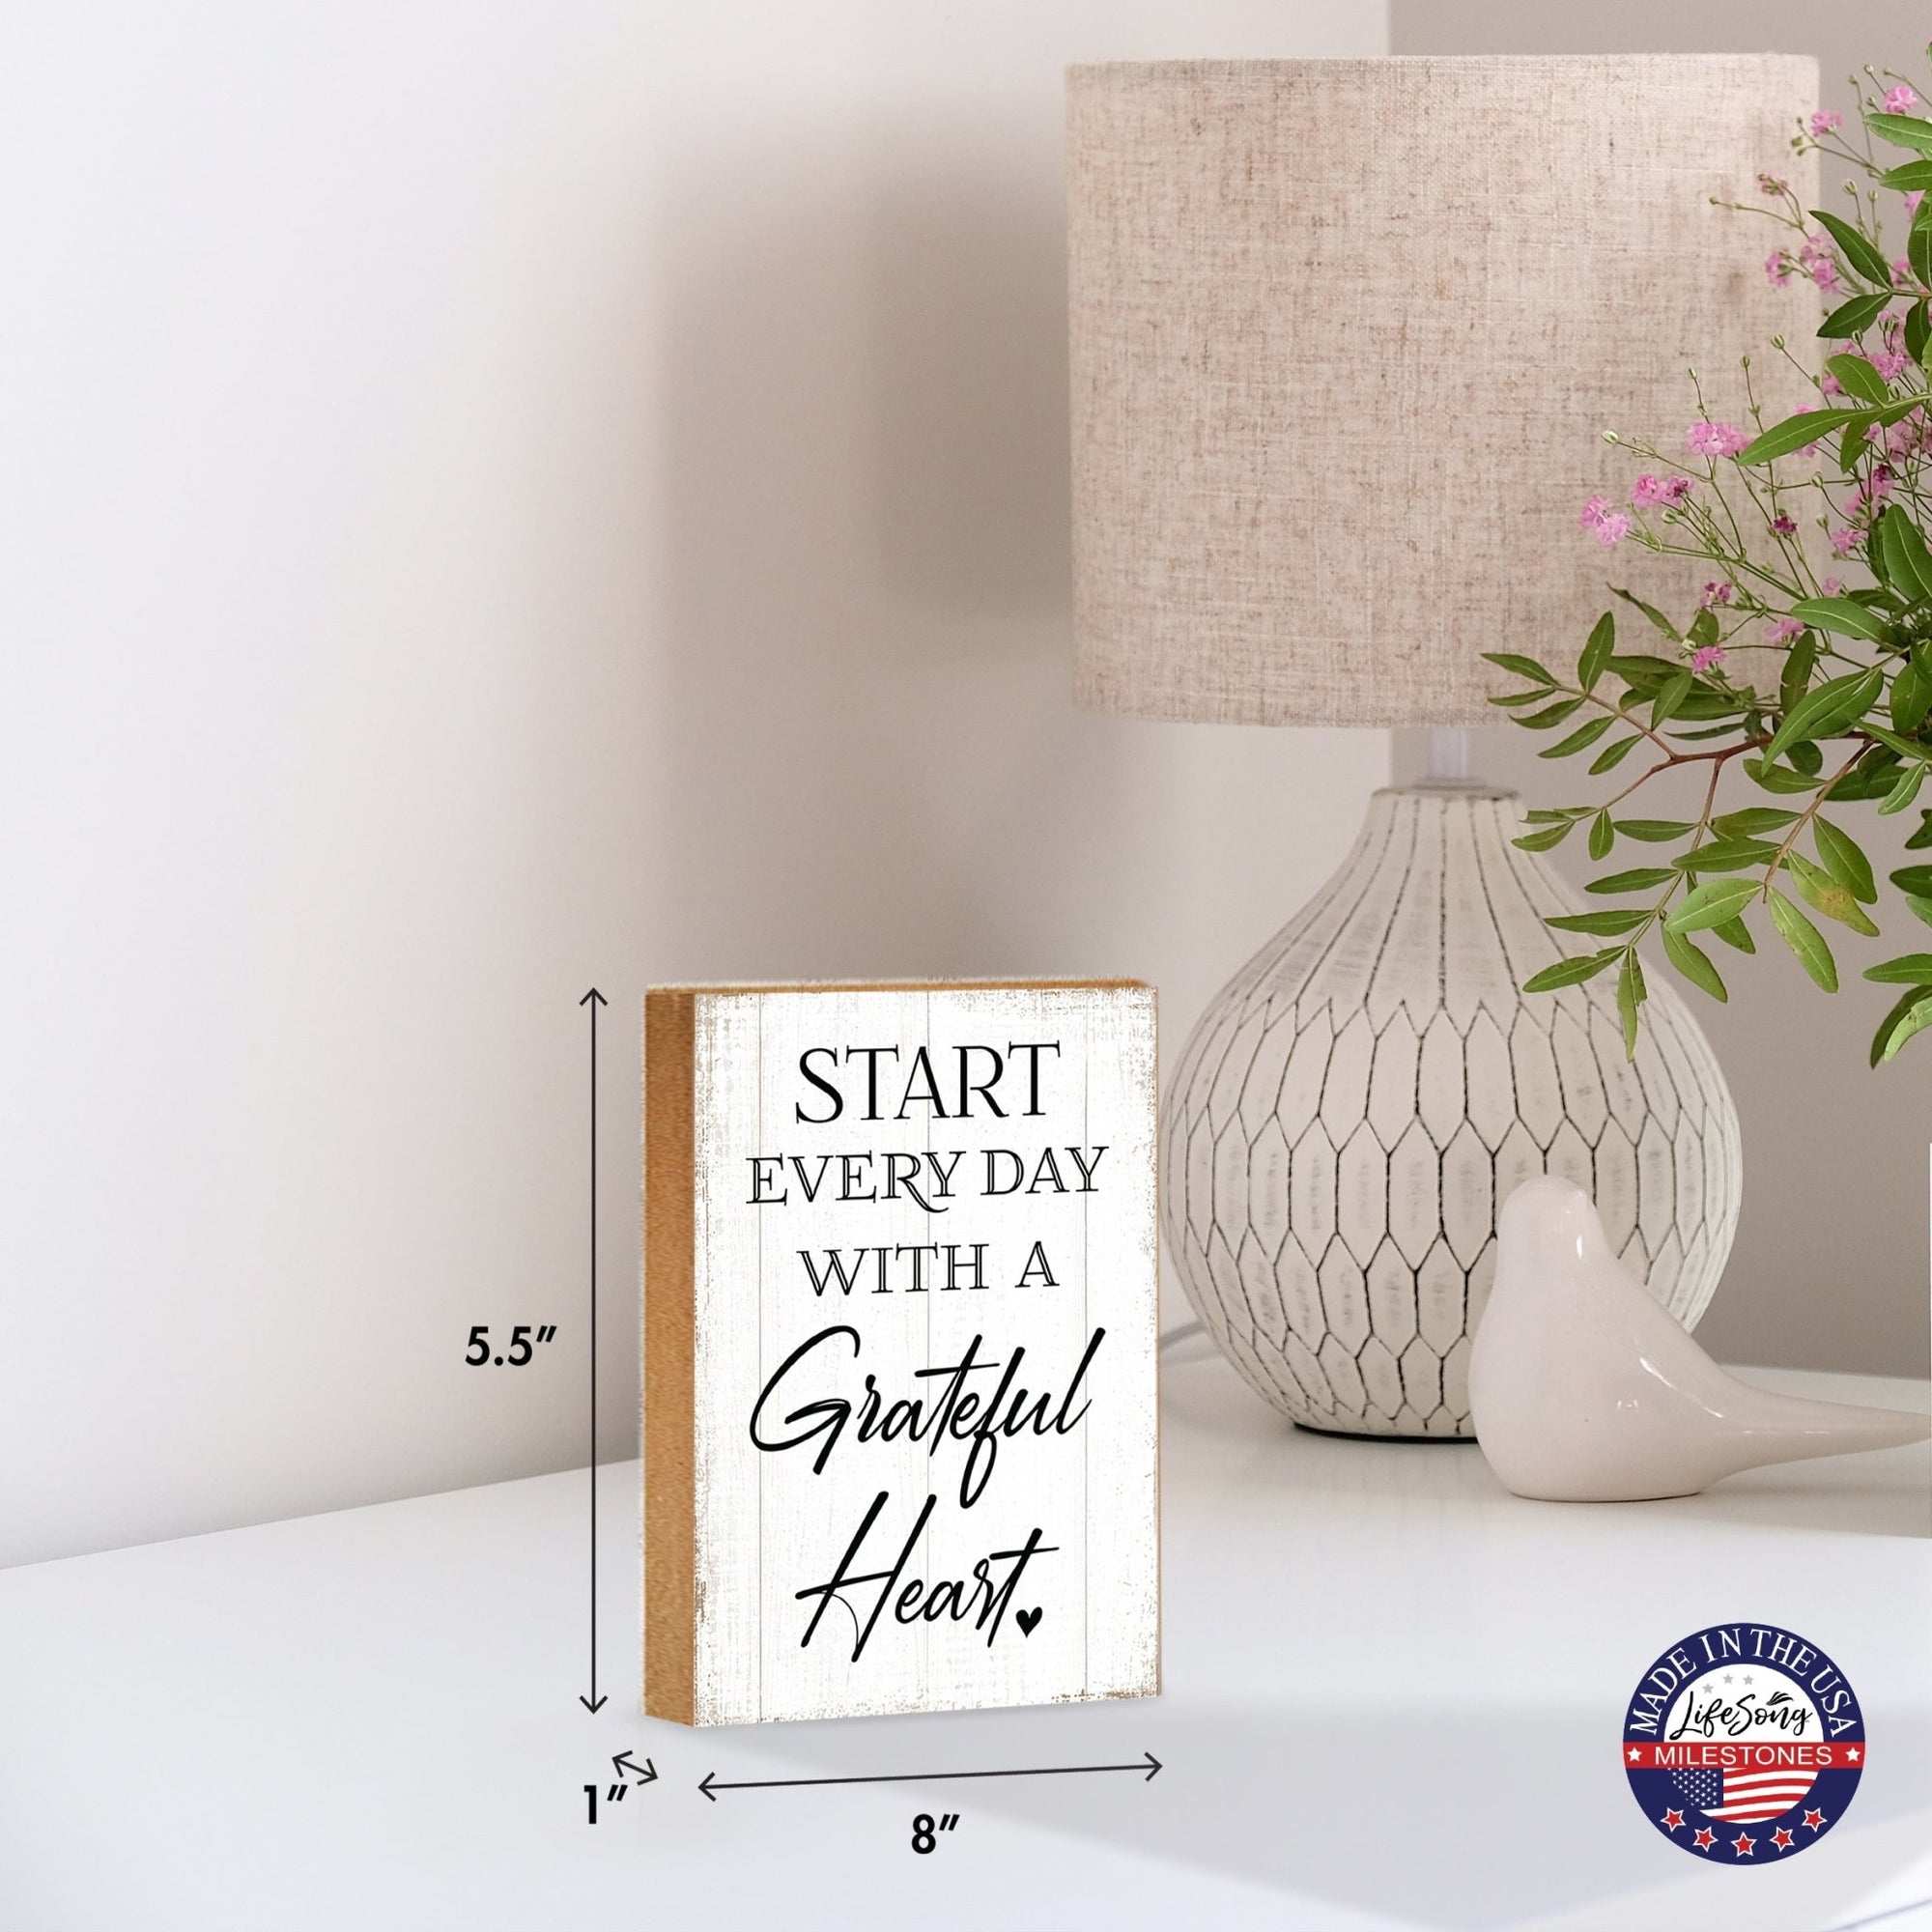 Elegant Motivational Wood Desk & Shelf Décor Gift ideas - Start Every Day With A Grateful Heart - LifeSong Milestones